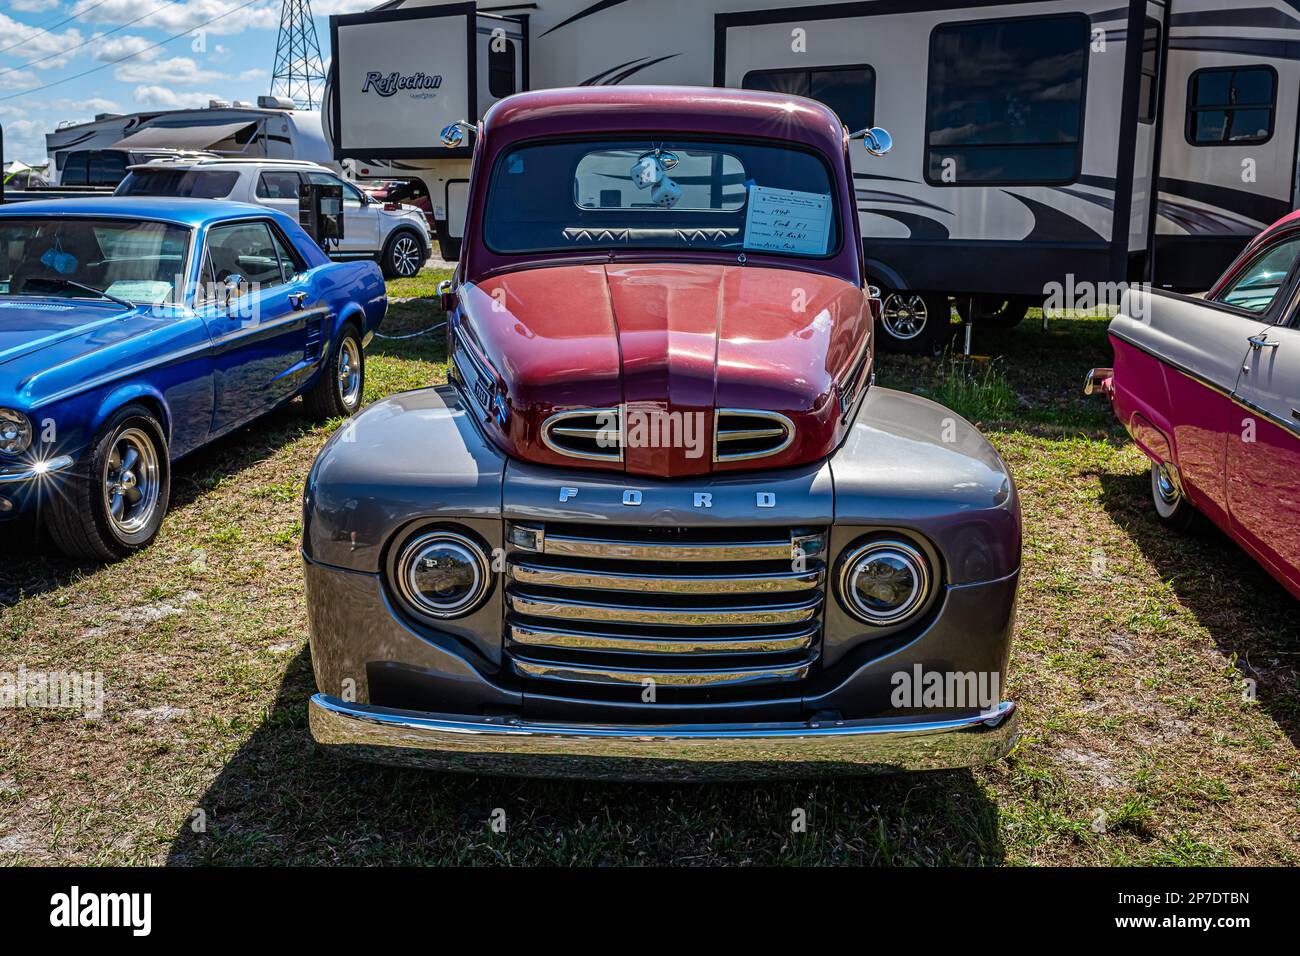 Fort Meade, FL - February 24, 2022: High perspective front view of a 1948 Ford F1 Pickup Truck at a local car show. Stock Photo